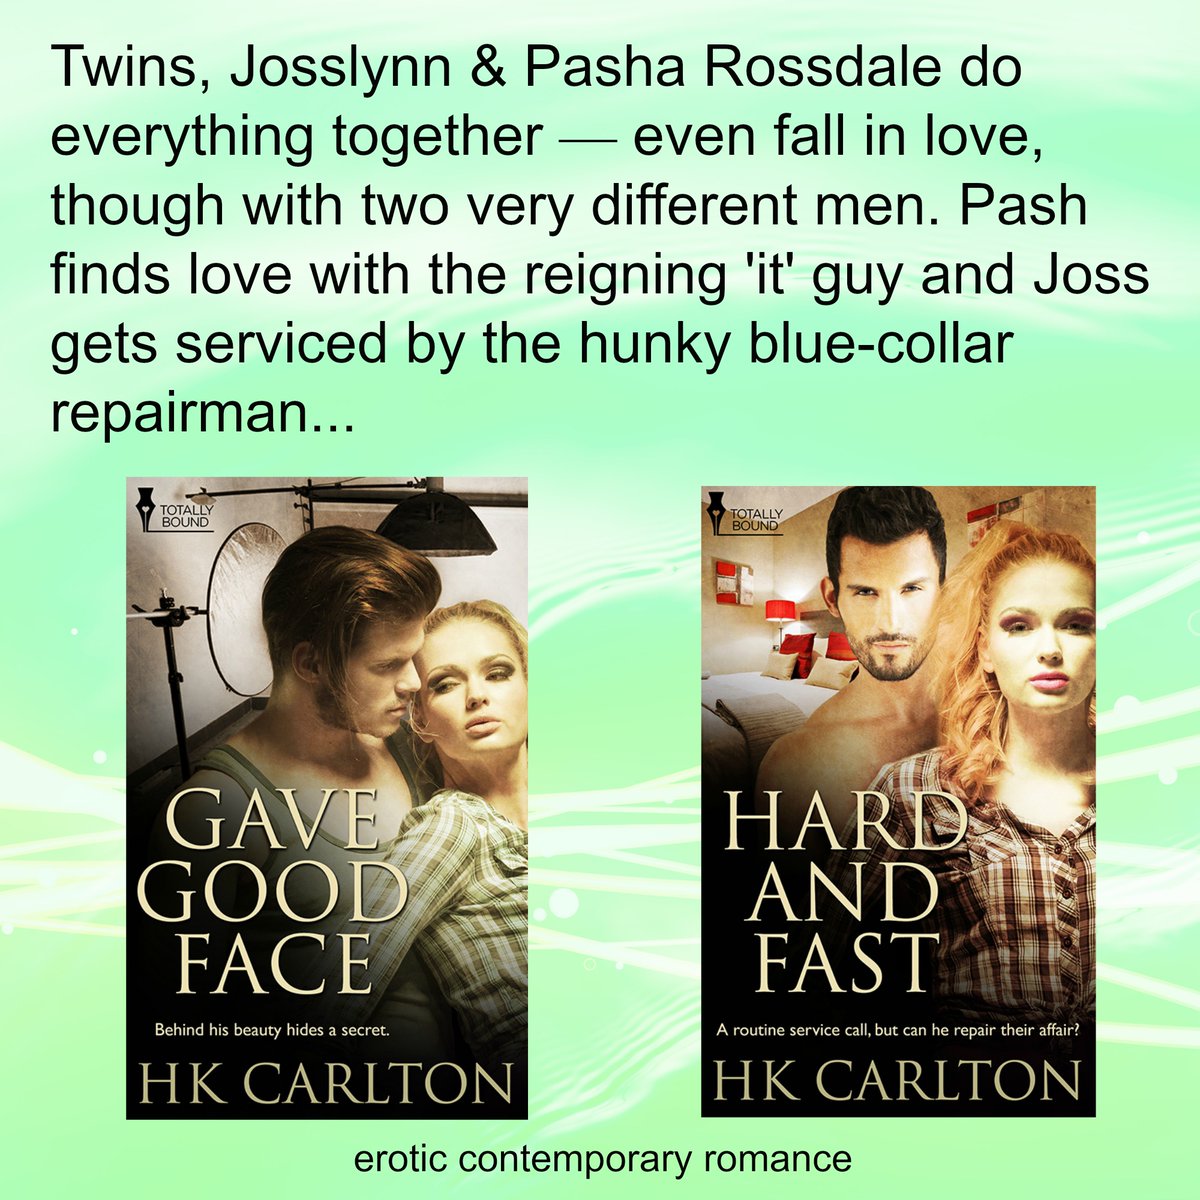 #ThrowbackThursday Twins, Josslynn and Pasha Rossdale do everything together, even fall in love, yet with two very different men. #erotic #romance #contemporary #twinwin #tbt @firstforromance

firstforromance.com/index.php?rout…